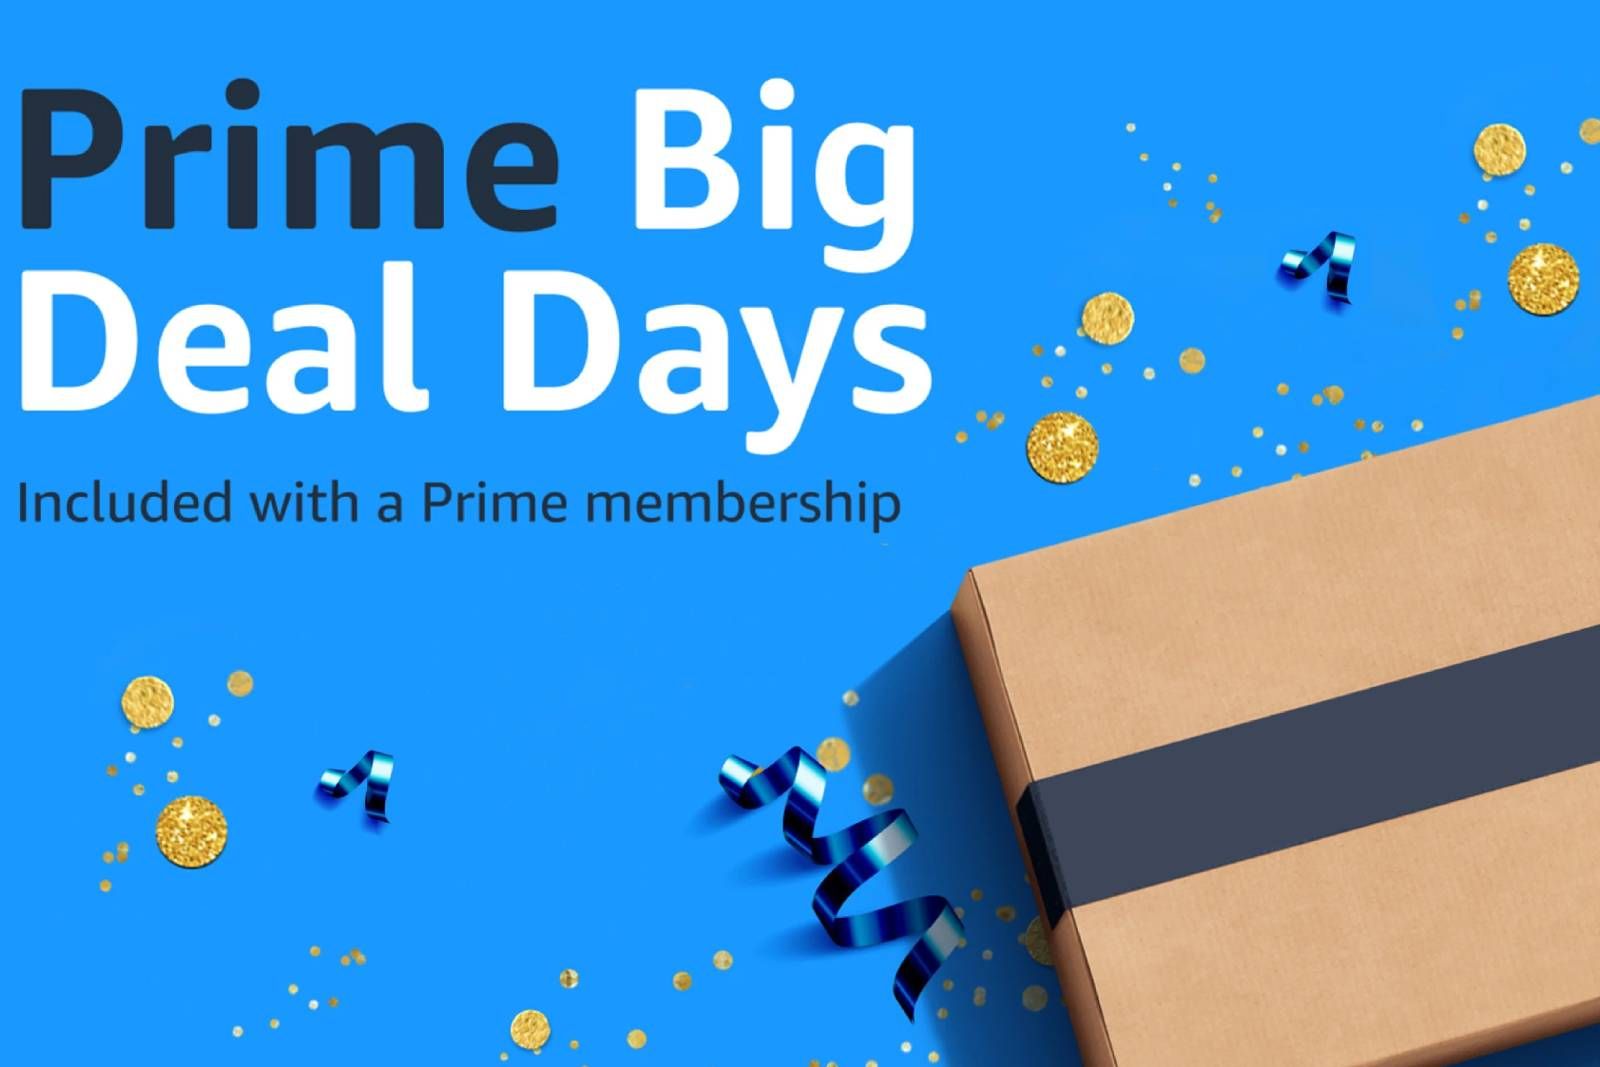 What is Amazon Prime Big Deal Days and when is it?